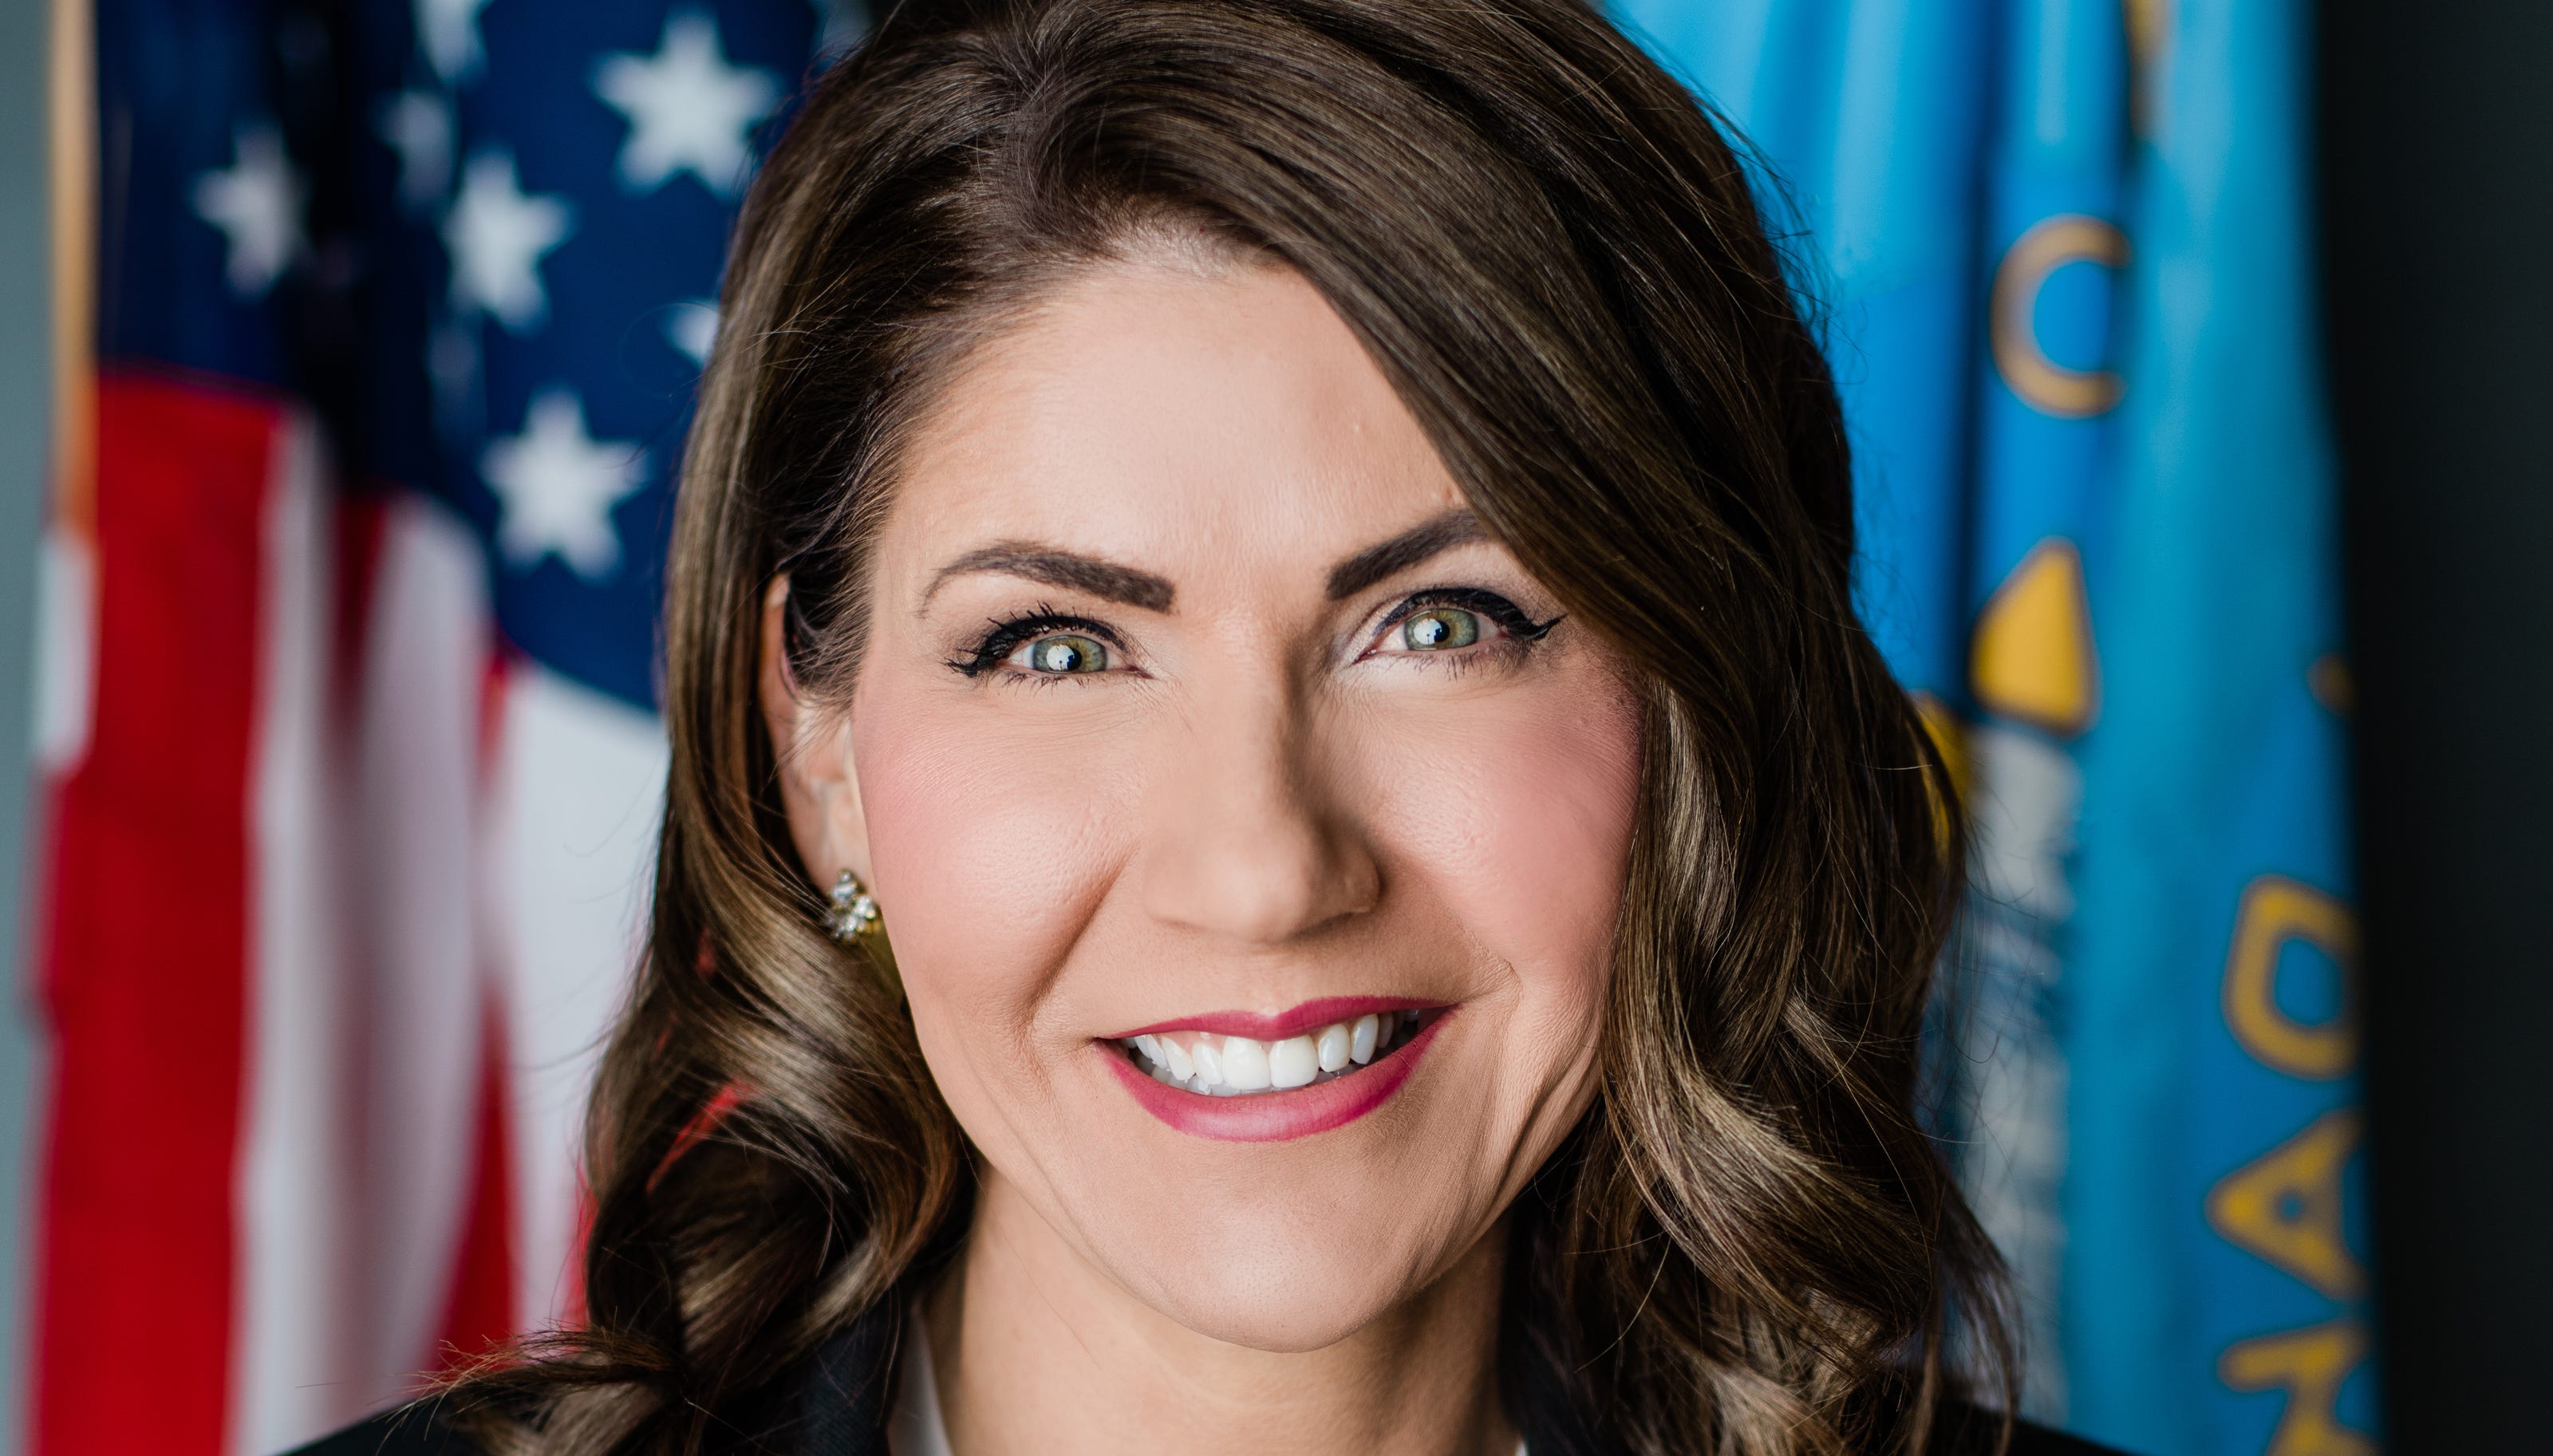 Noem Making South Dakota an example to the nation